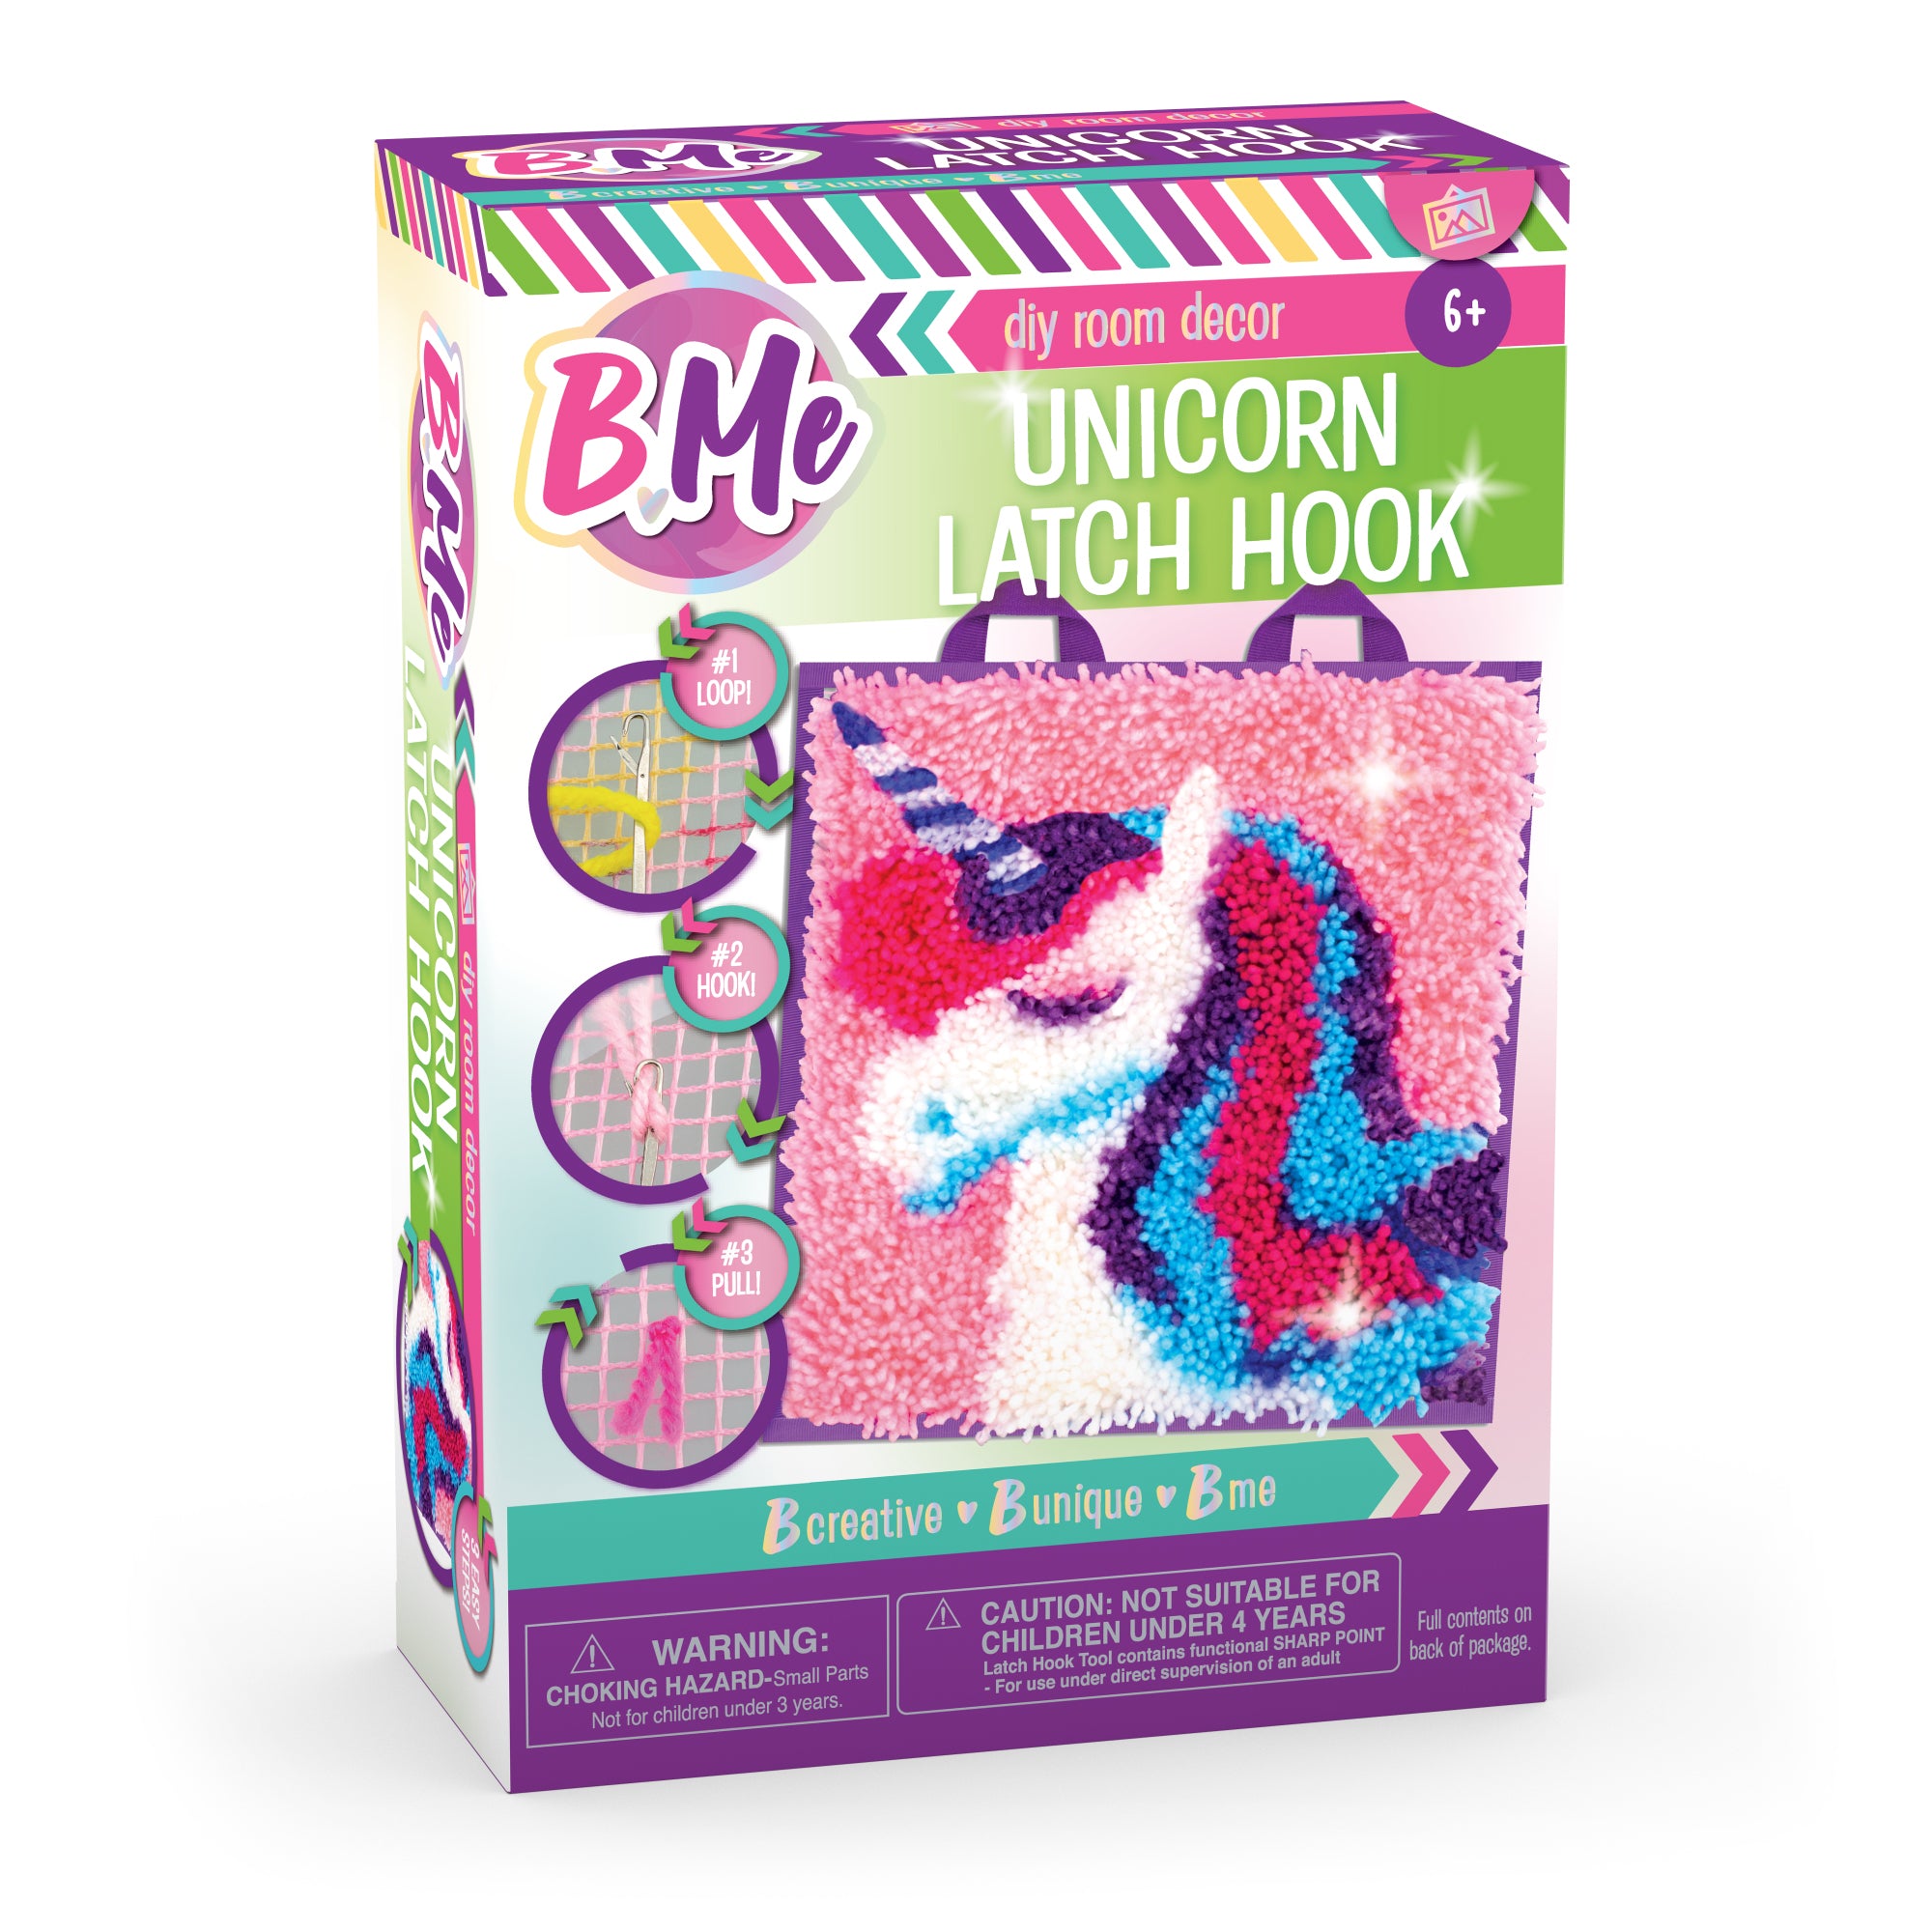 B Me DIY Unicorn Latch Hook Kit for Girls – Mini Rug Sewing Set with 15 Colorful Yarn Bundles, Color-Coded Canvas, DIY Grils Bed